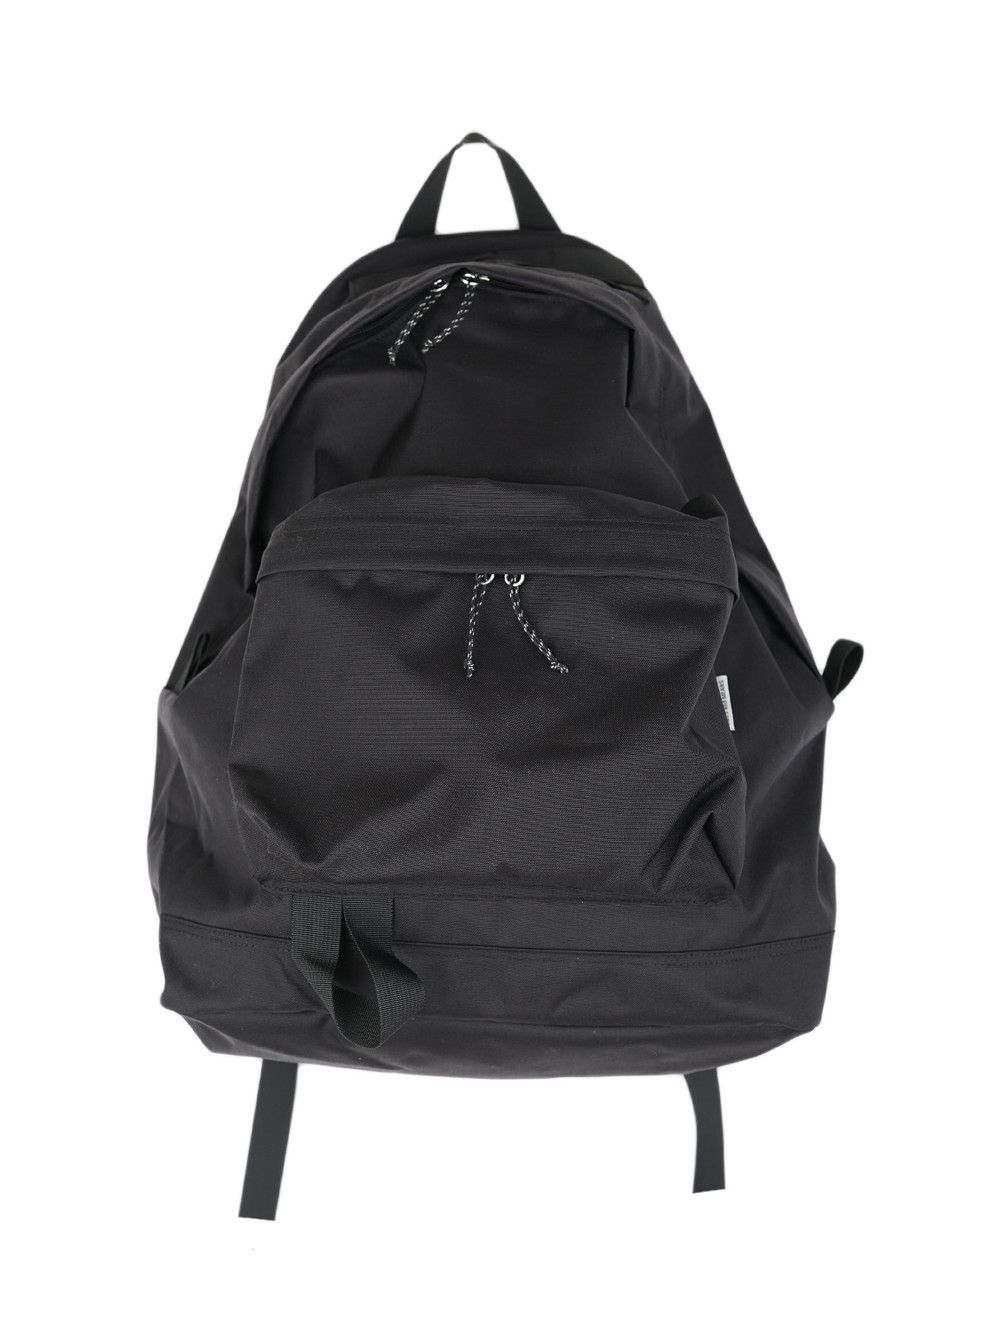 Very Goods | ENDS and MEANS Daytrip Backpack | DOCKLANDS Store